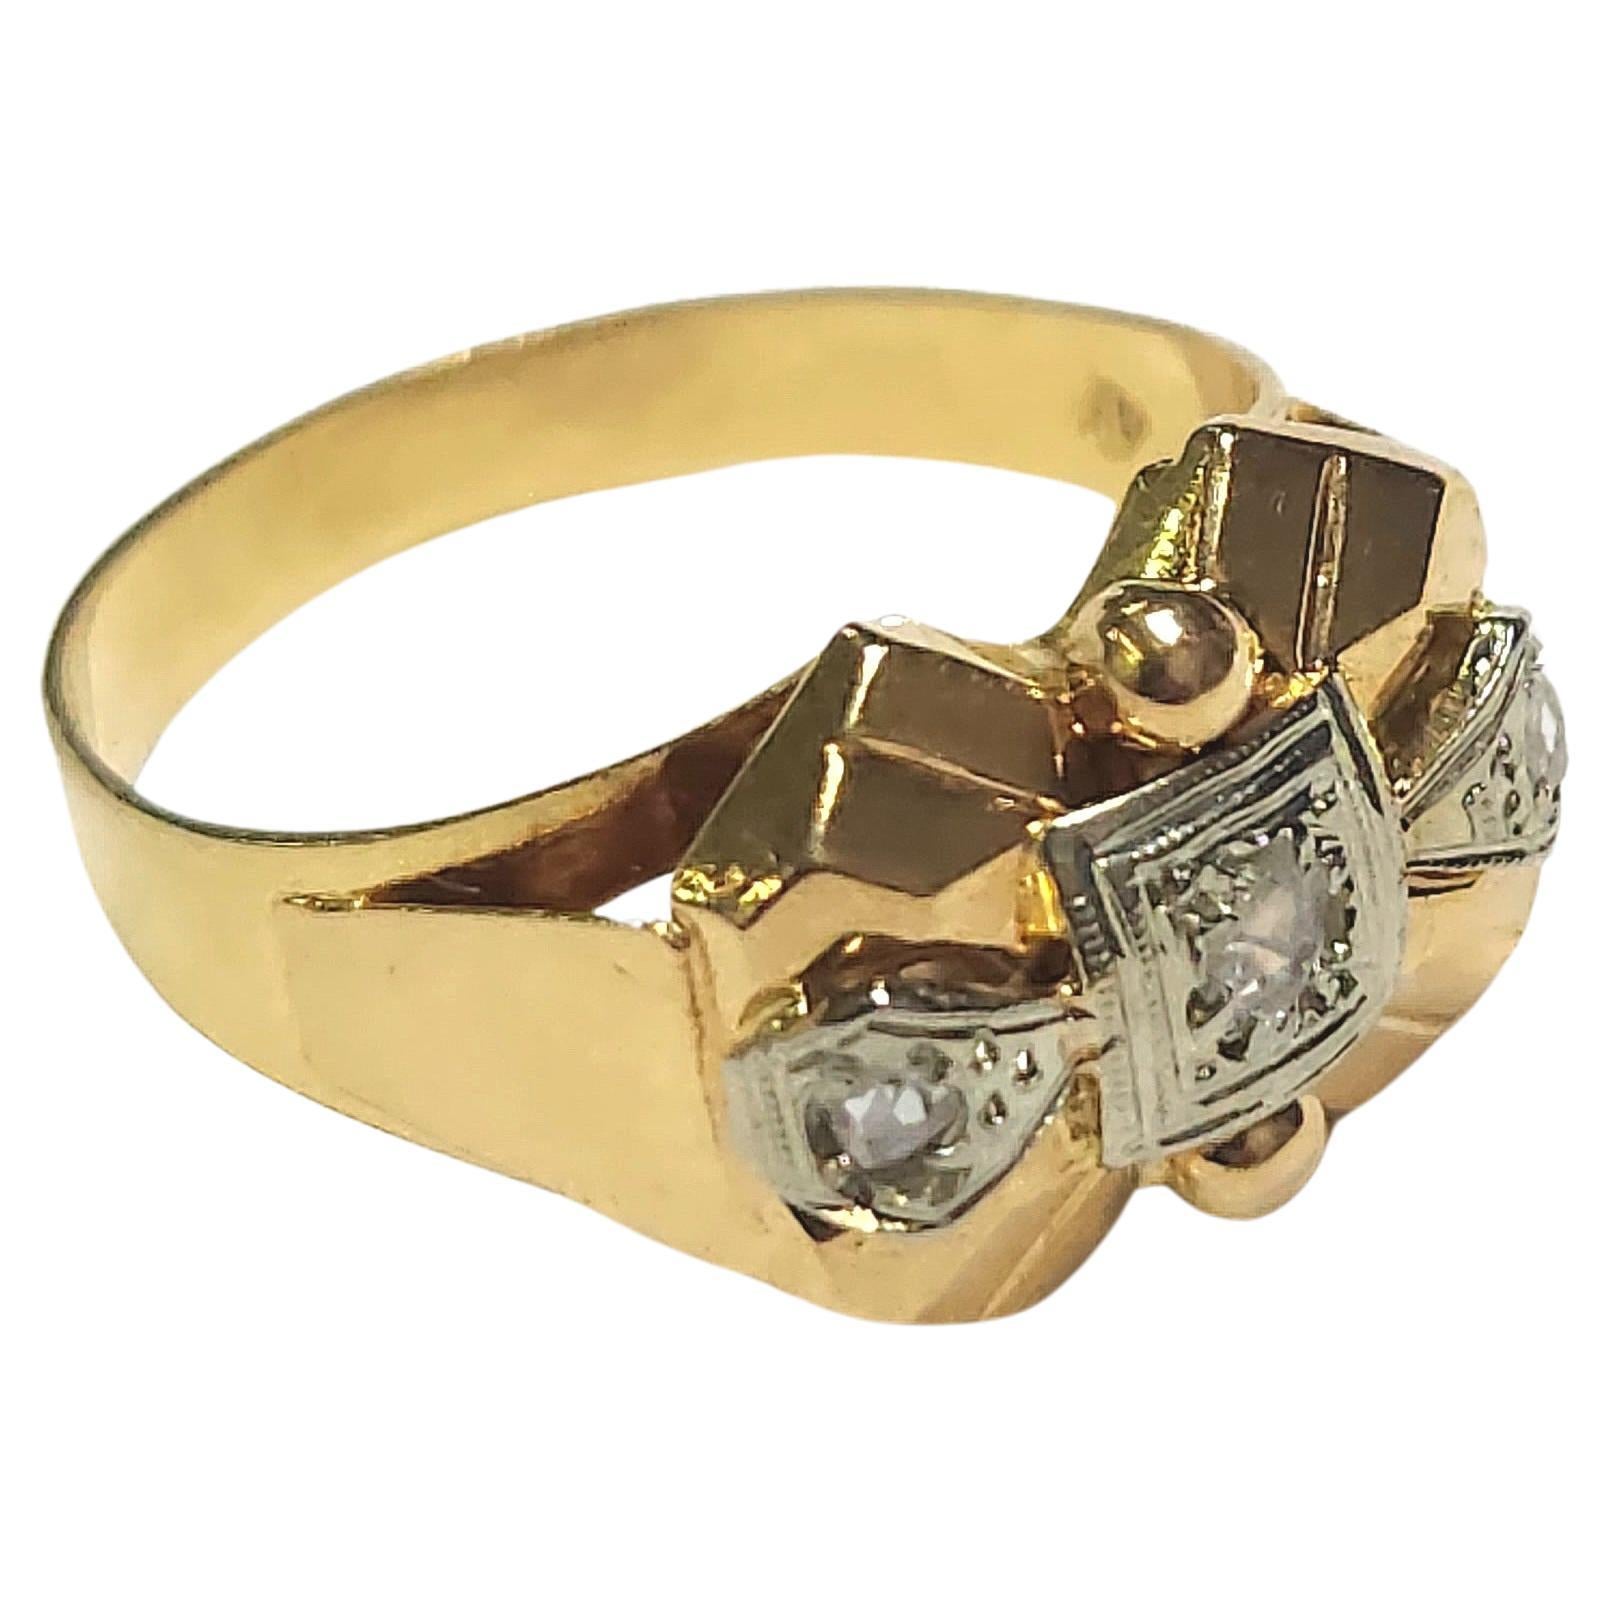 Art deco era 18k yellow gold ring decorted with rose cut diamonds hall marked inside the ring band dates back to europe 1925/1930s